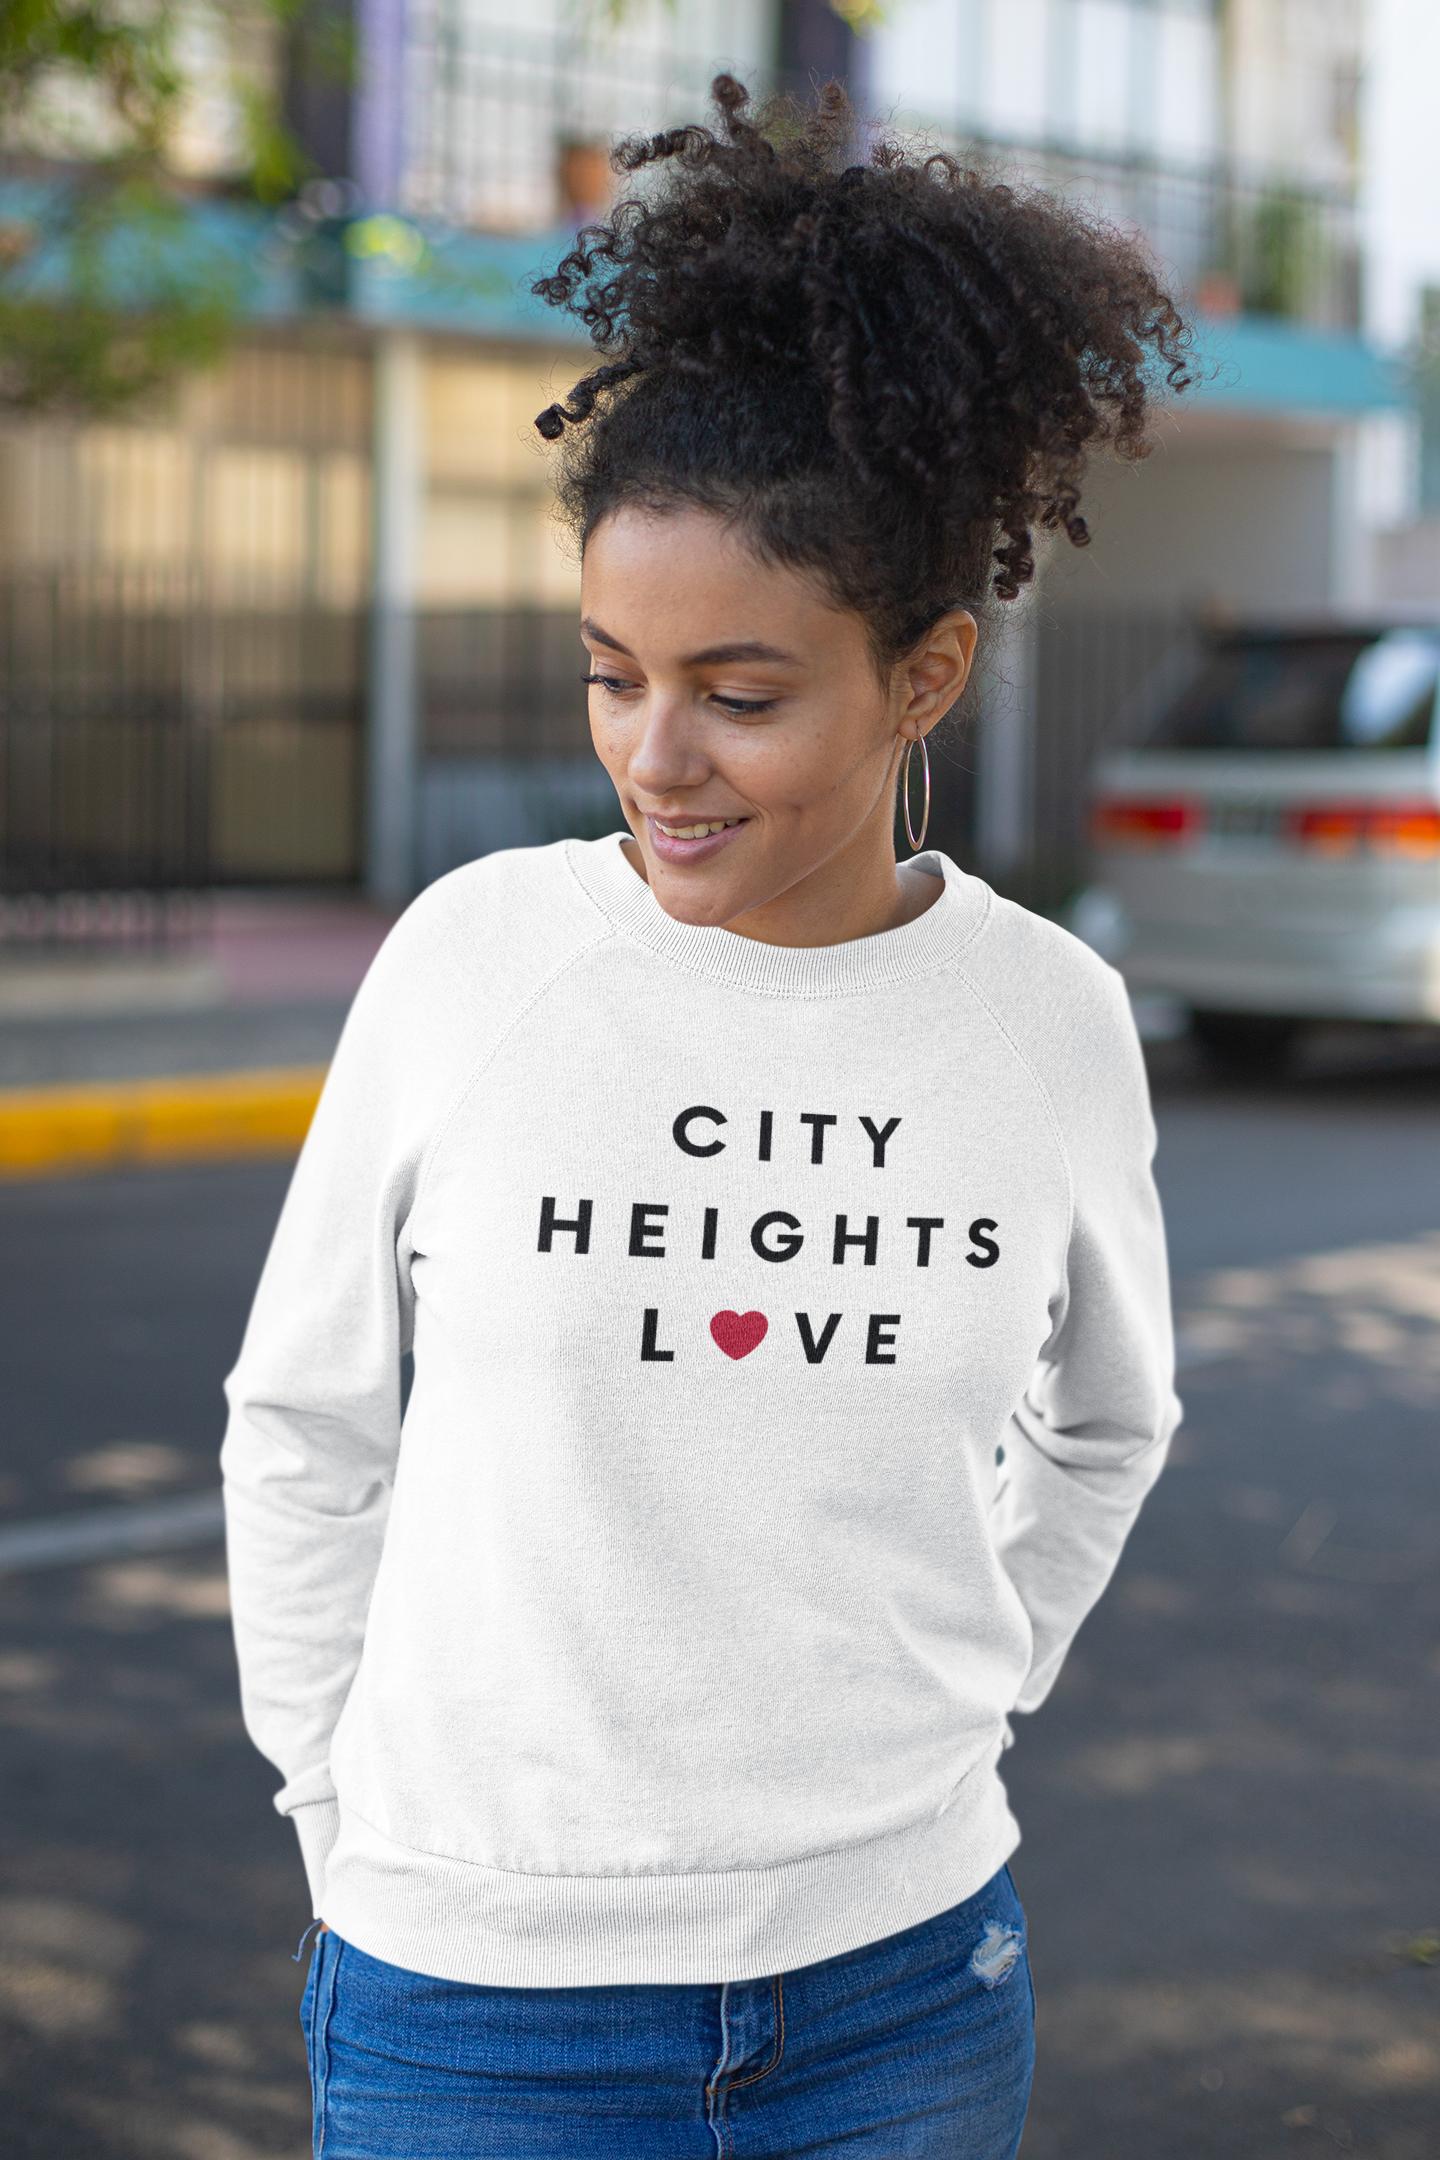 Curly haired women standing outside a building wearing a City Heights sweatshirt.